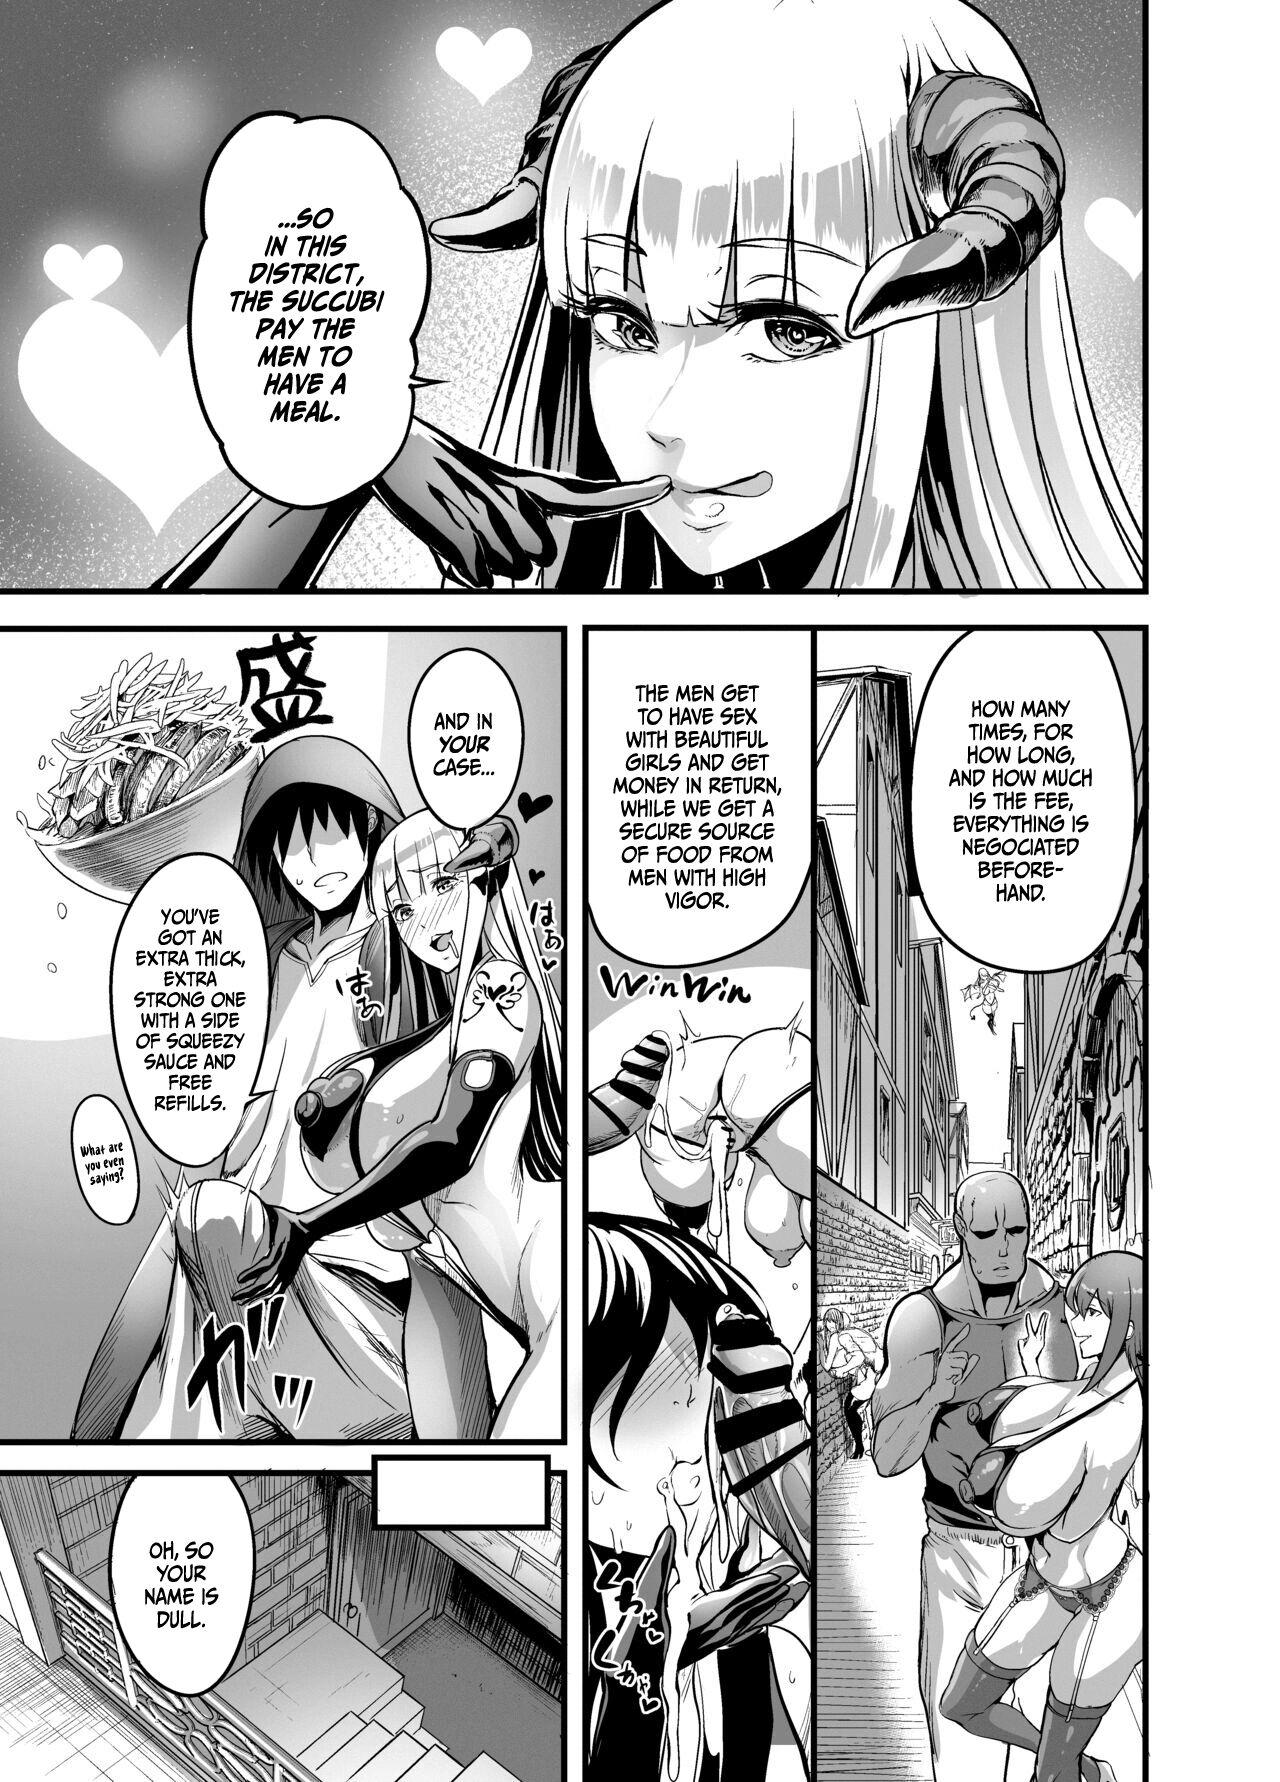 Fishnet Welcome to Succubus District! - Original Ffm - Page 7